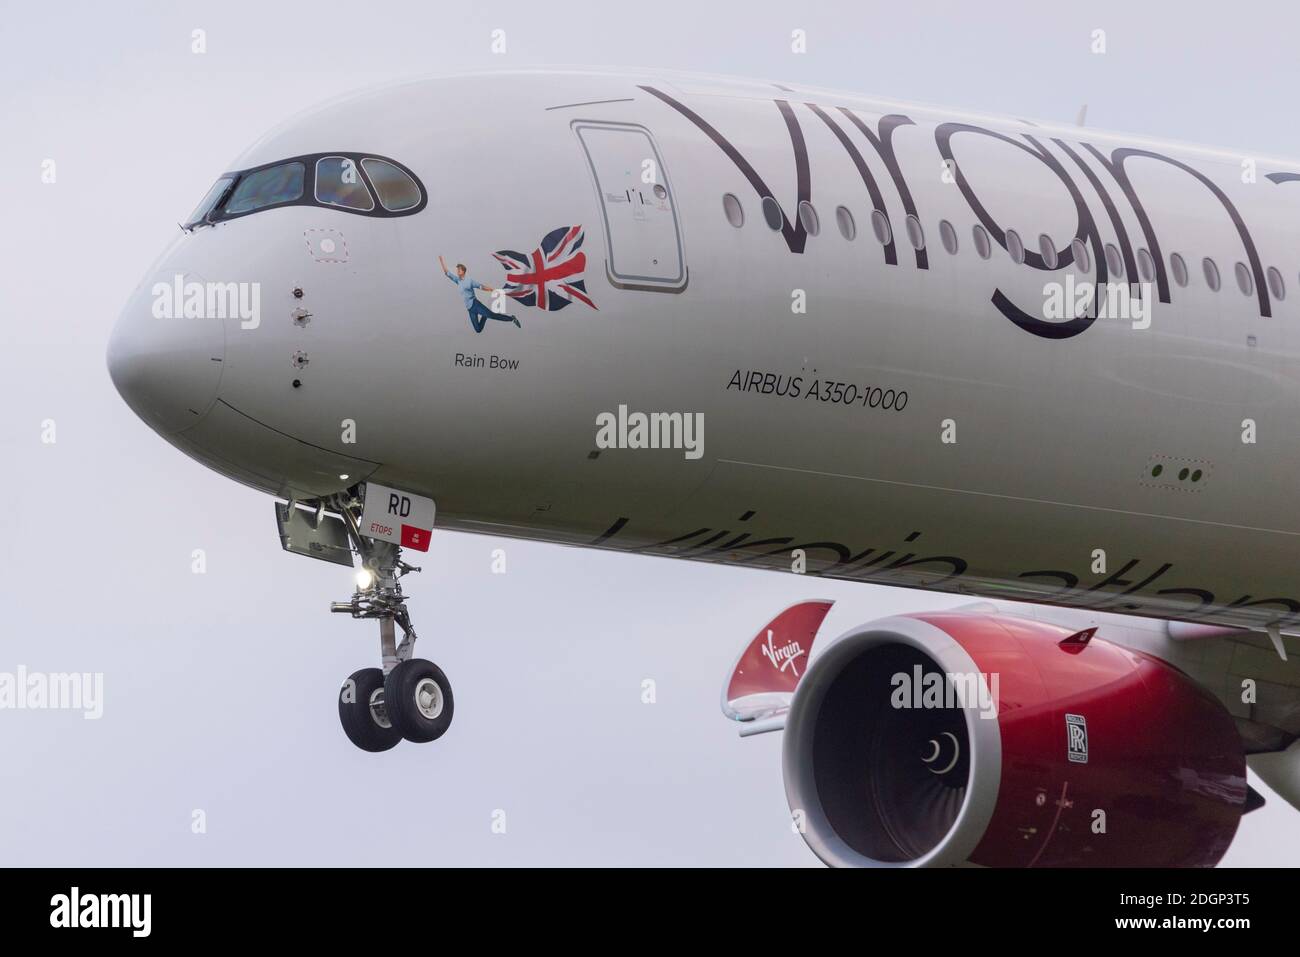 London Heathrow Airport, London, UK. 9th Dec, 2020. Overnight rain has cleared into a cloudy cool morning as the first arrivals land at Heathrow. One of the early arrivals was Virgin Atlantic's Airbus A350 named Rain Bow in support of LGBTQ+. Gay pride Stock Photo